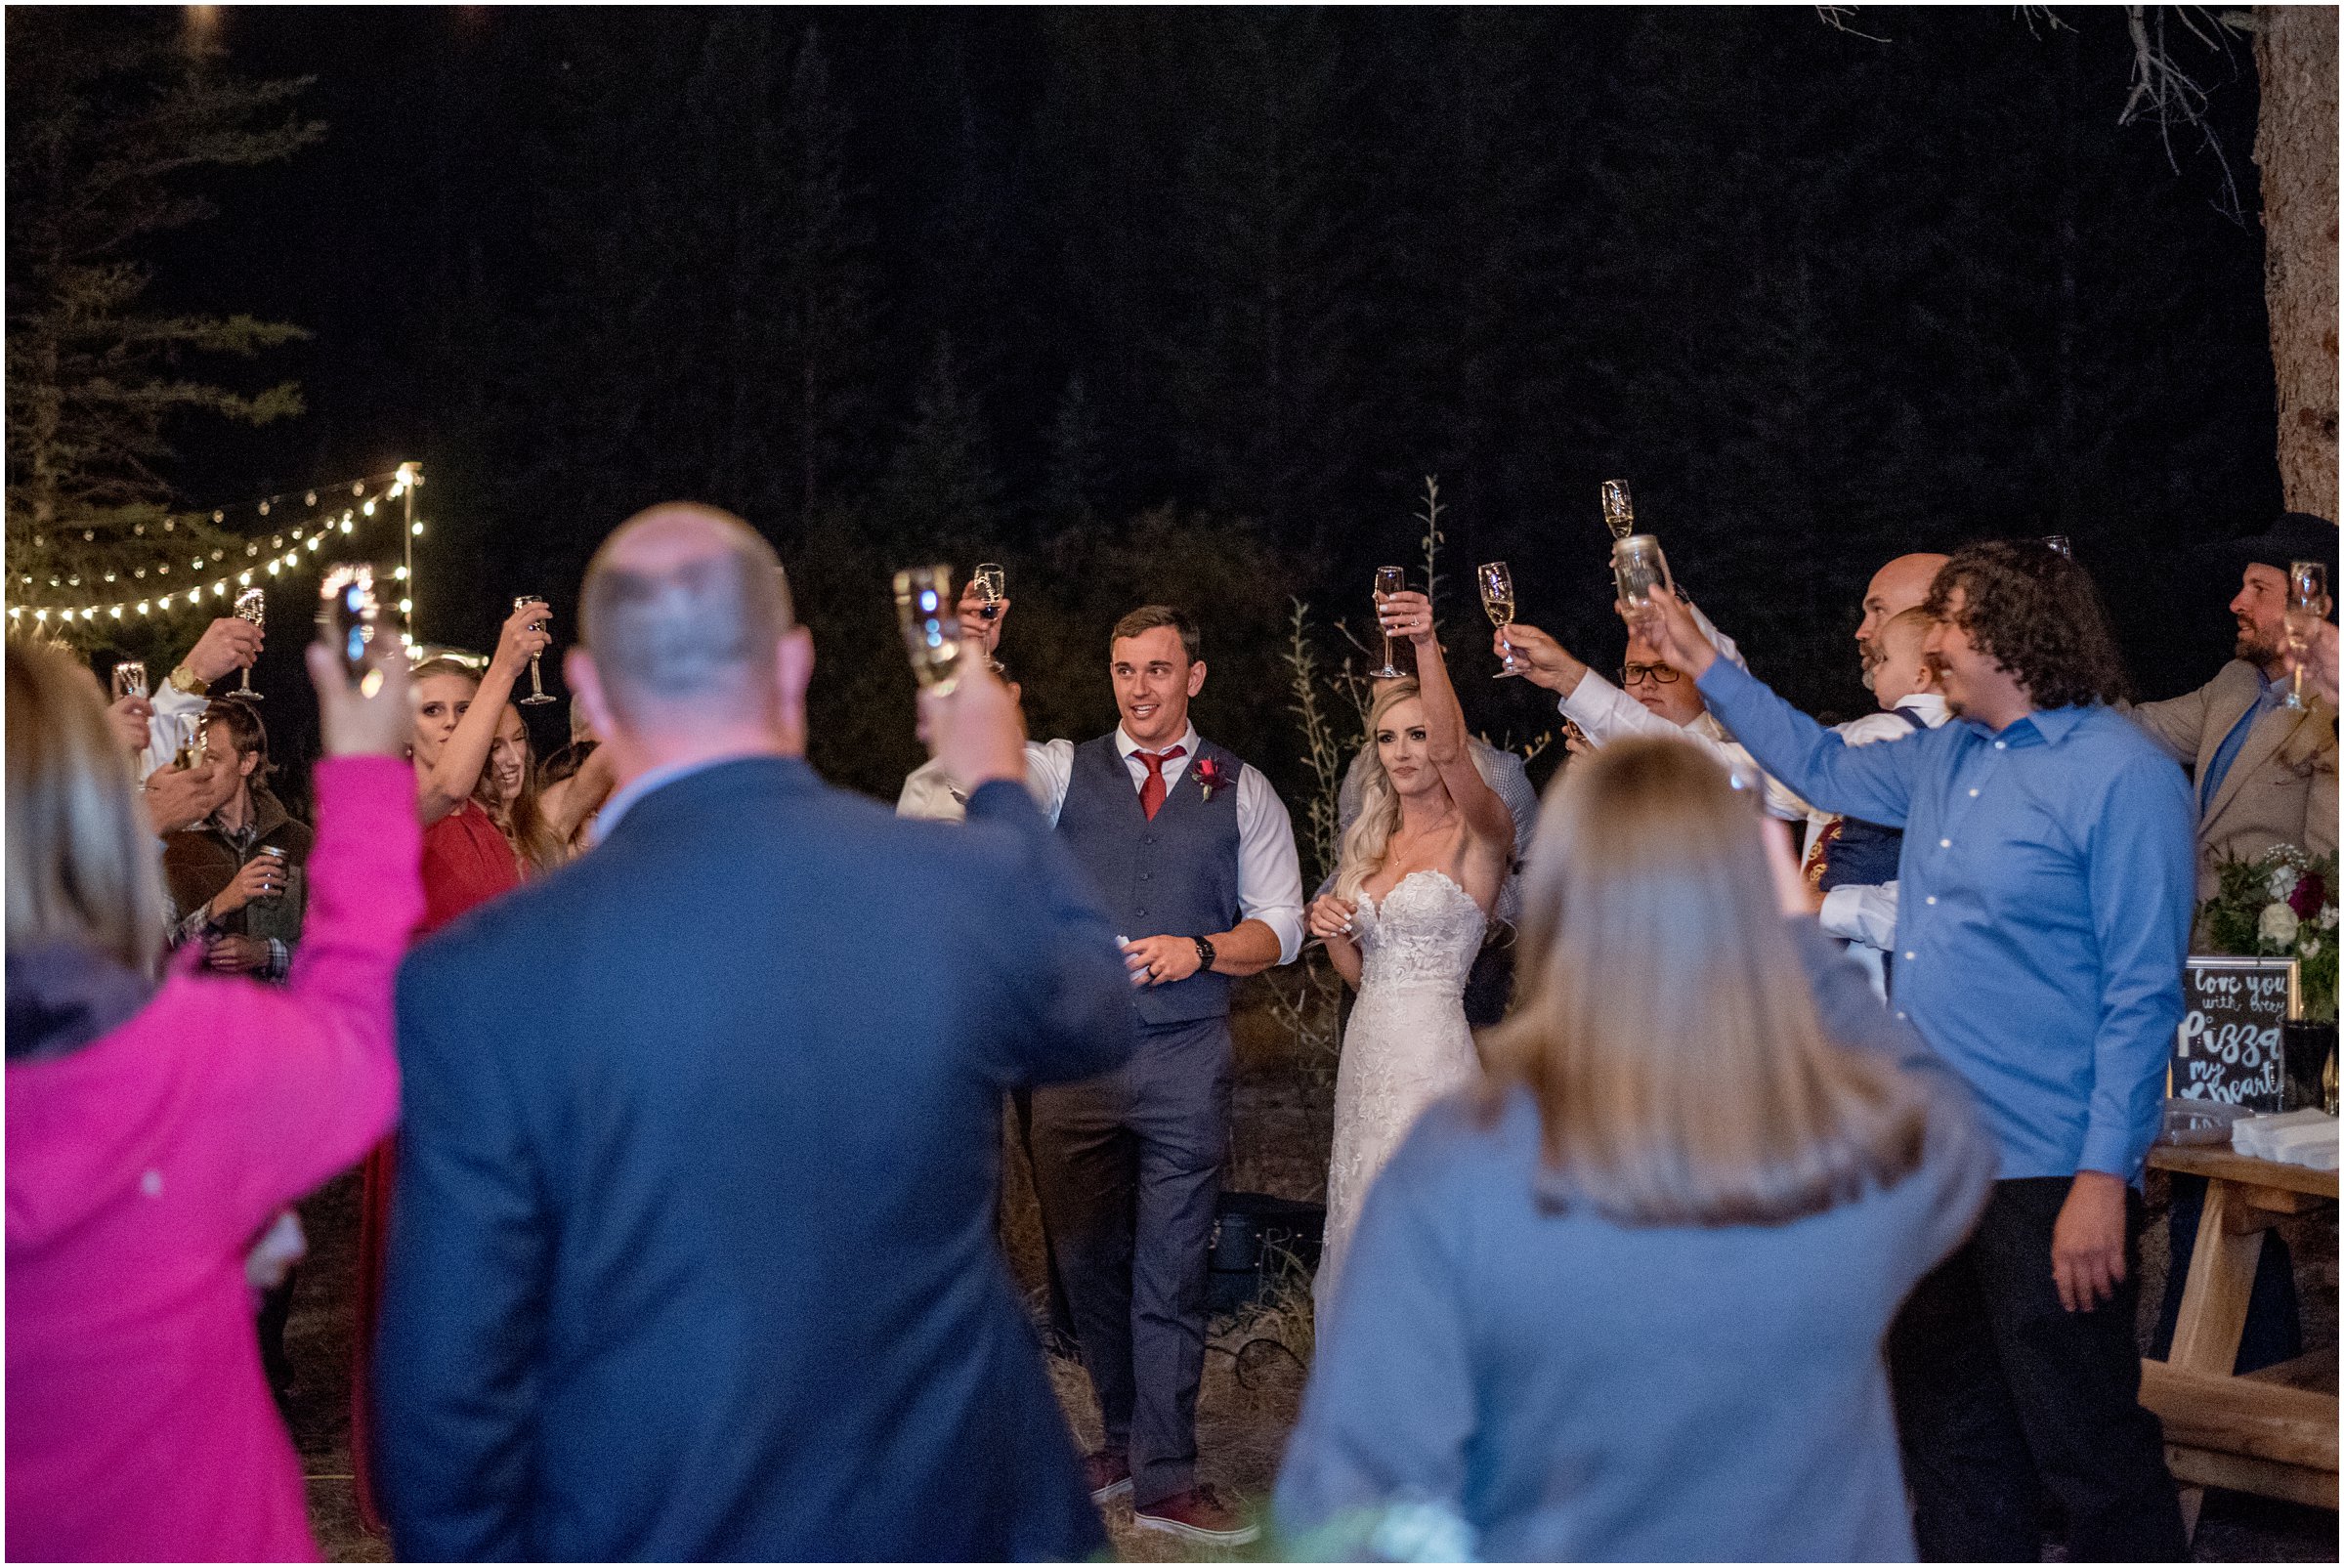 guests toast the bride and groom at their outdoor reception next to the creek